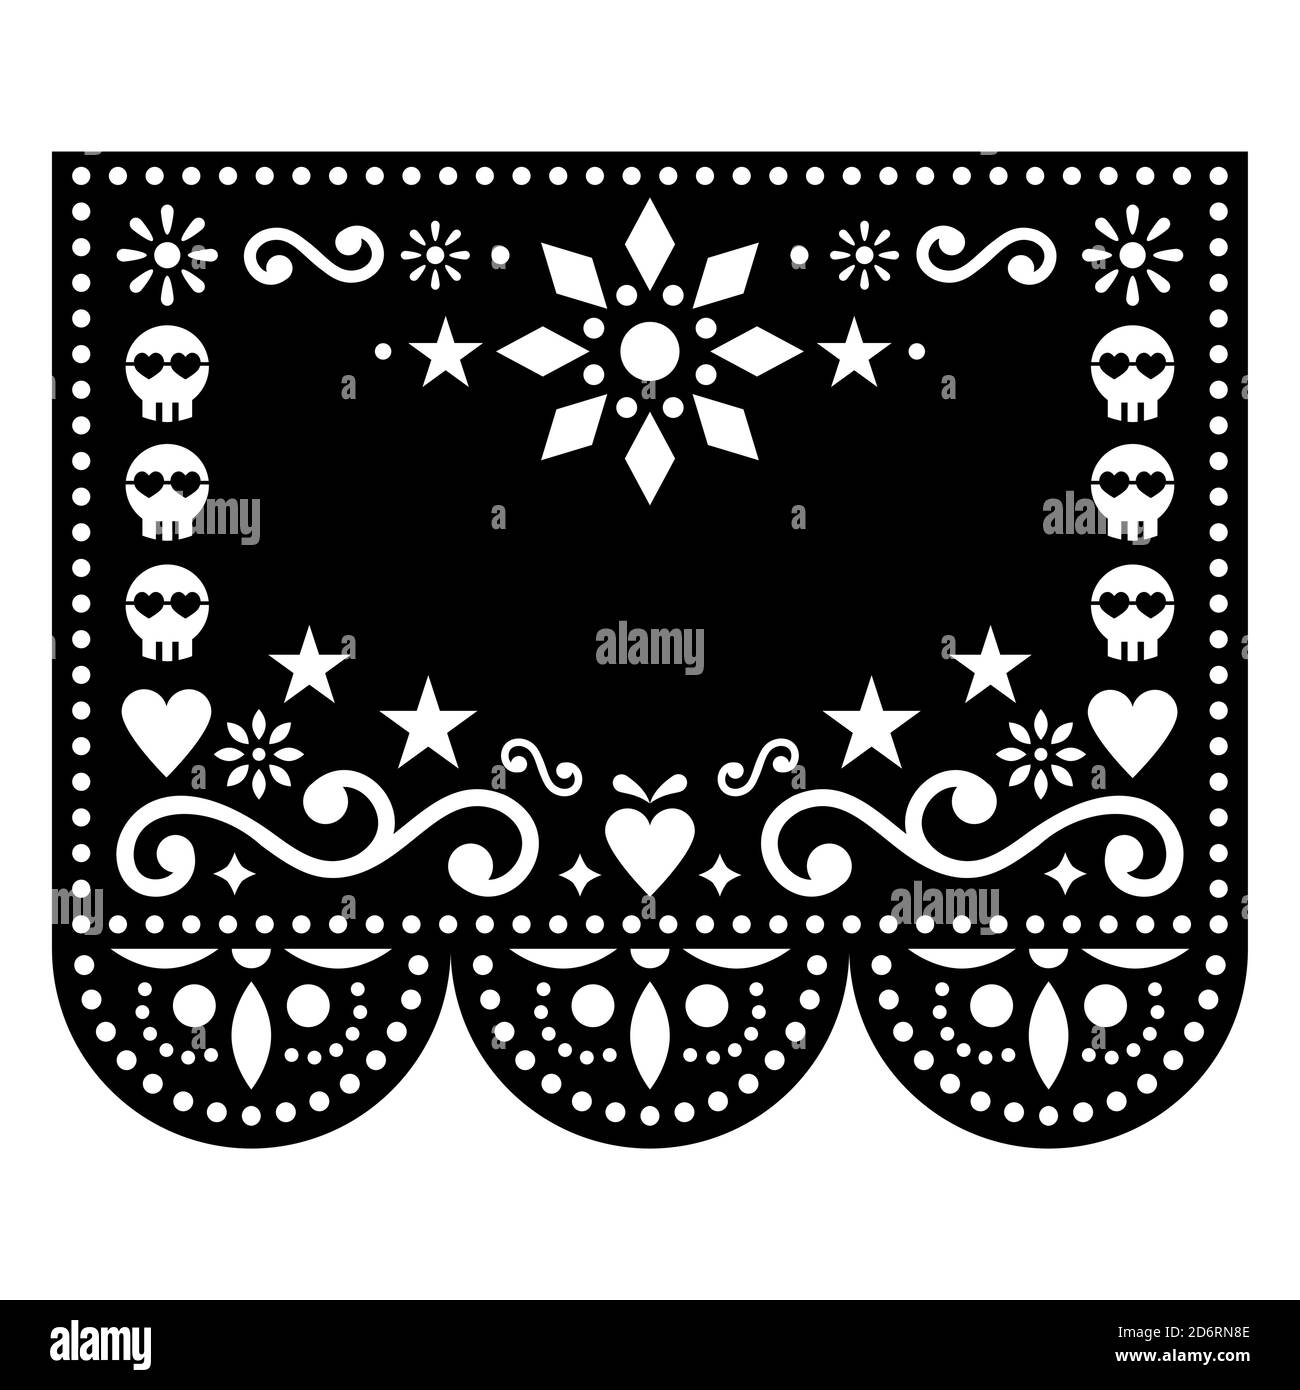 Halloween and Day of the Dead Papel Picado vector design with skulls and flowers, Mexican paper cut out pattern - Dia de Los Muertos celebration Stock Vector